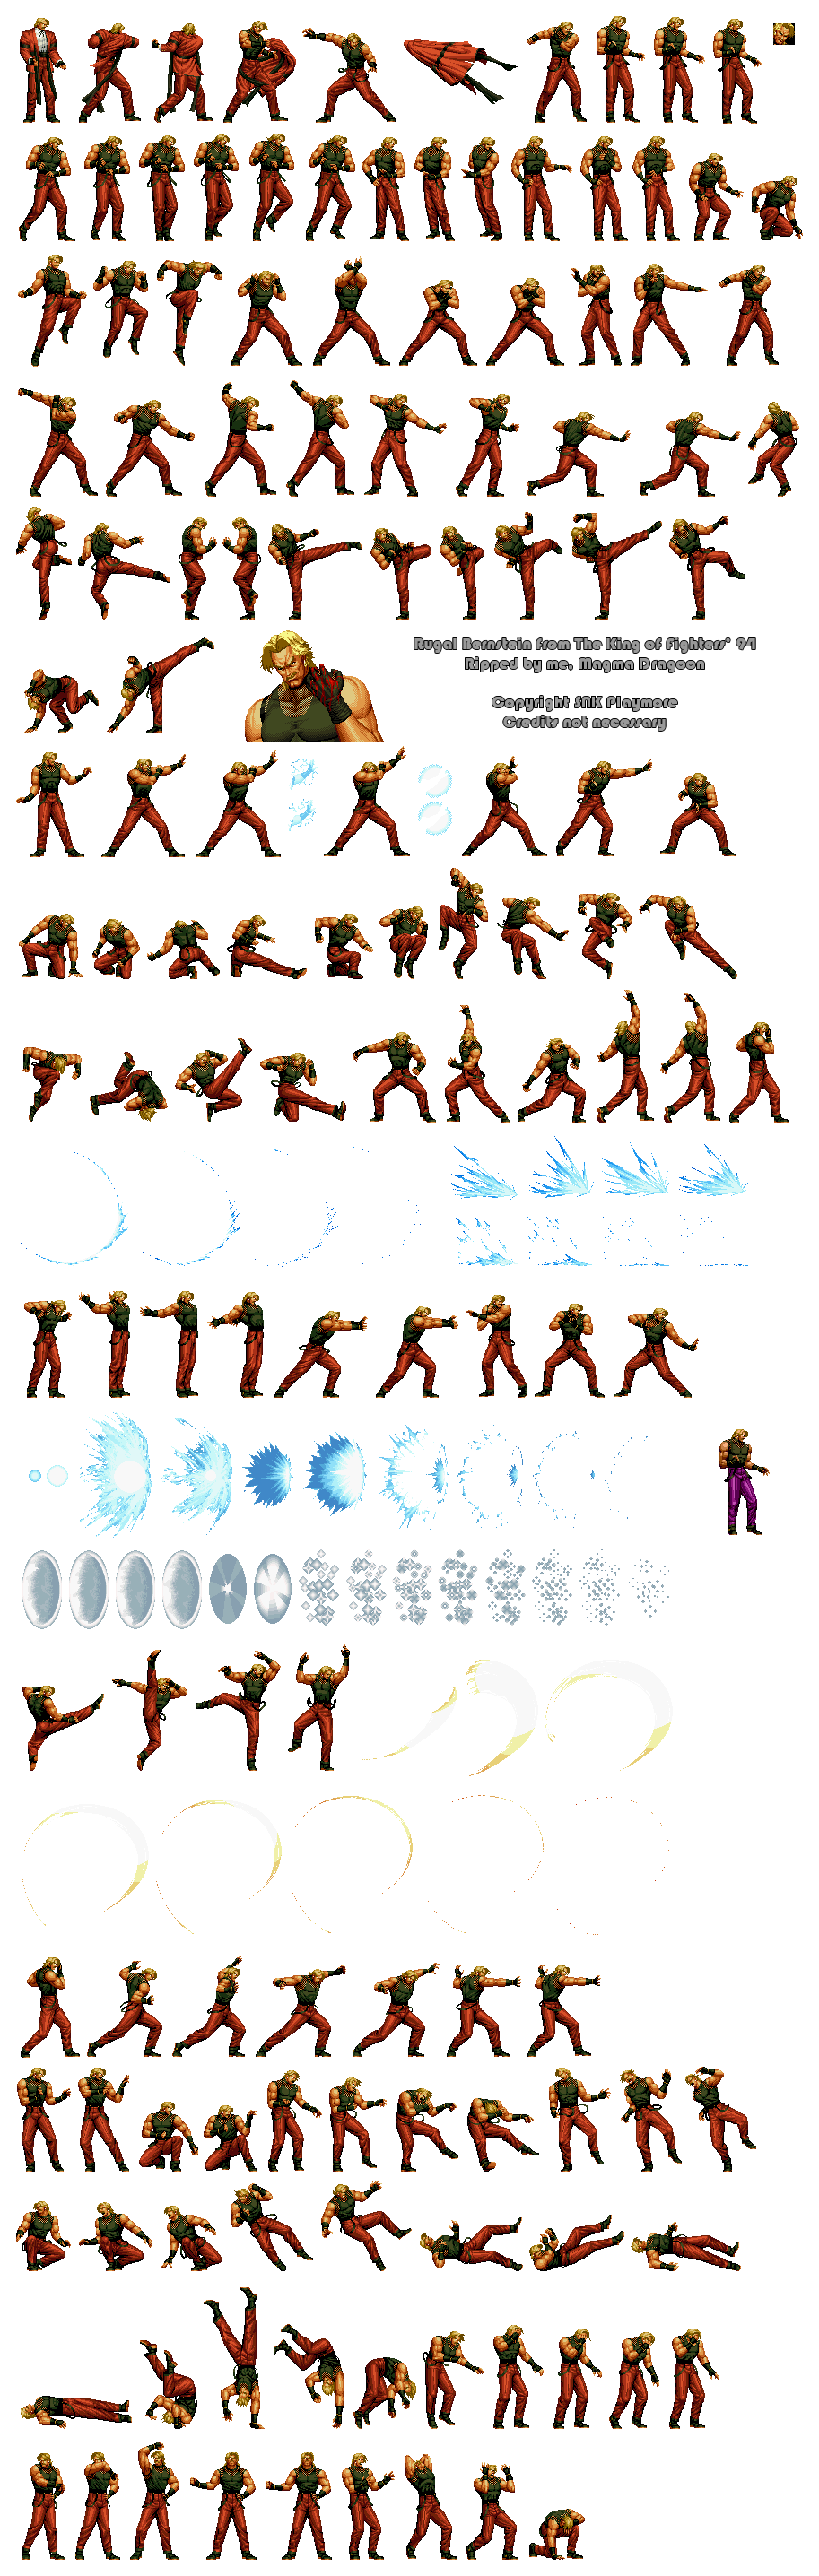 King Of Fighters Sprite Sheet